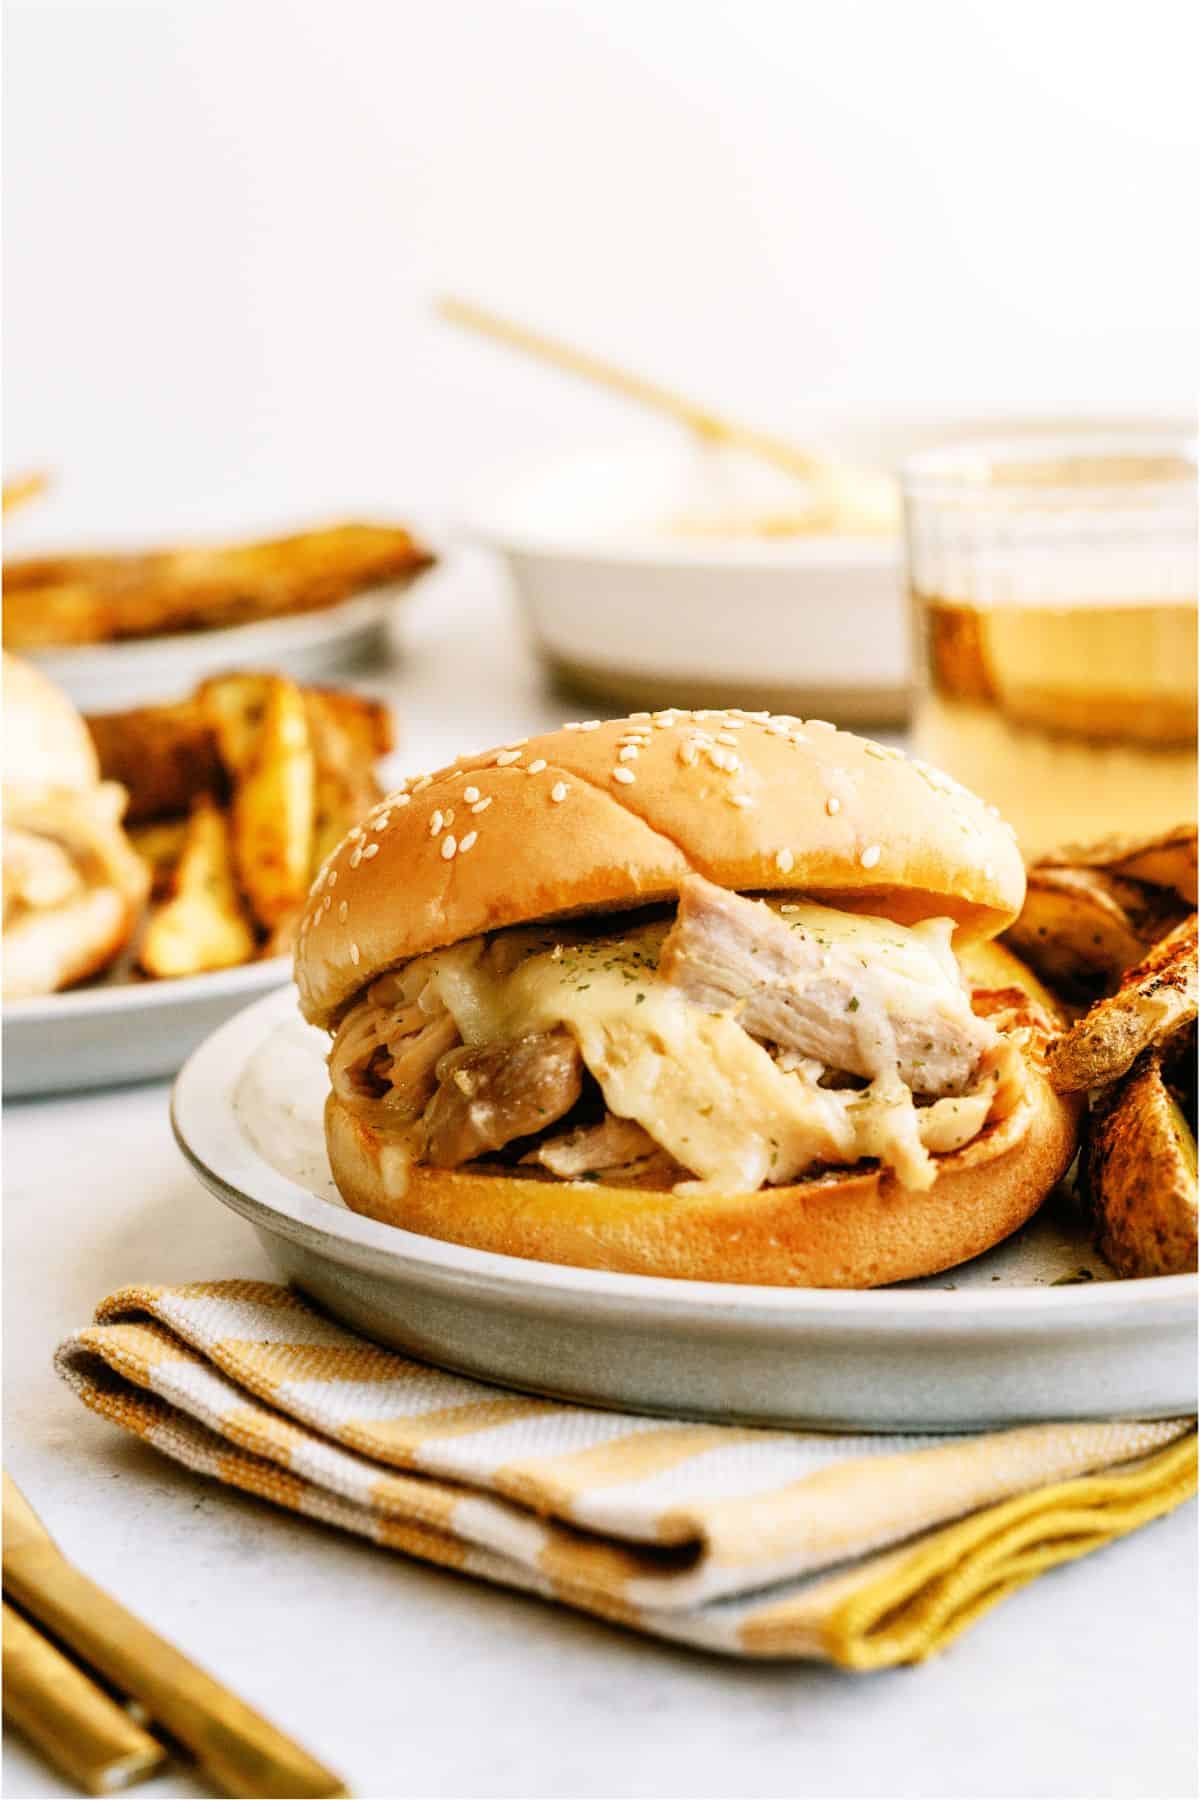 Instant Pot Ranch Chicken and Swiss Sandwiches